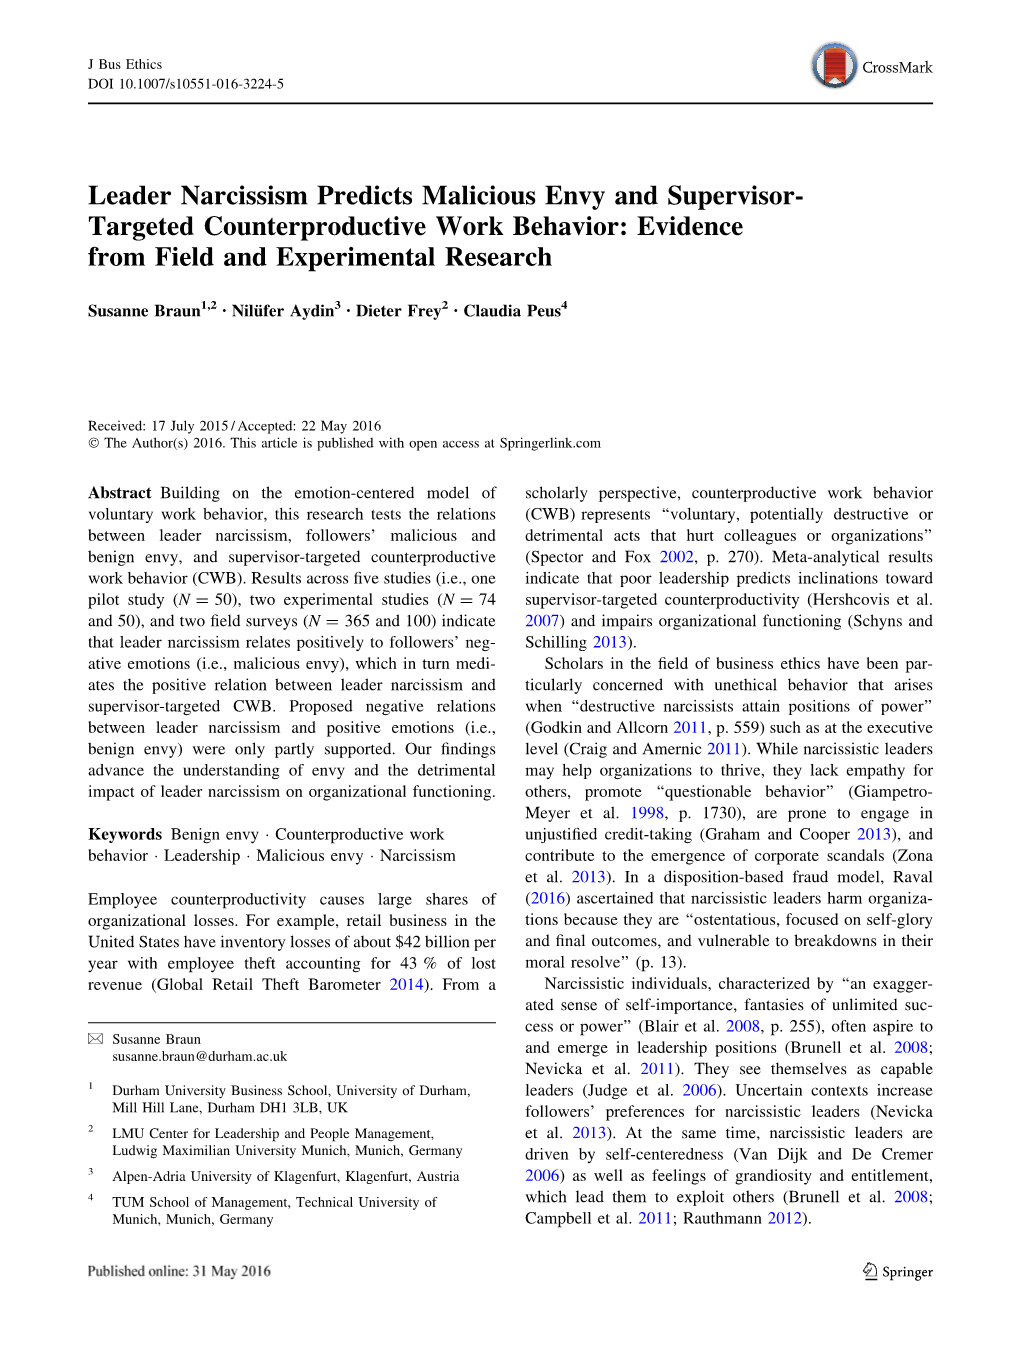 Leader Narcissism Predicts Malicious Envy and Supervisor-Targeted Counterproductive Work… Follower Relationships